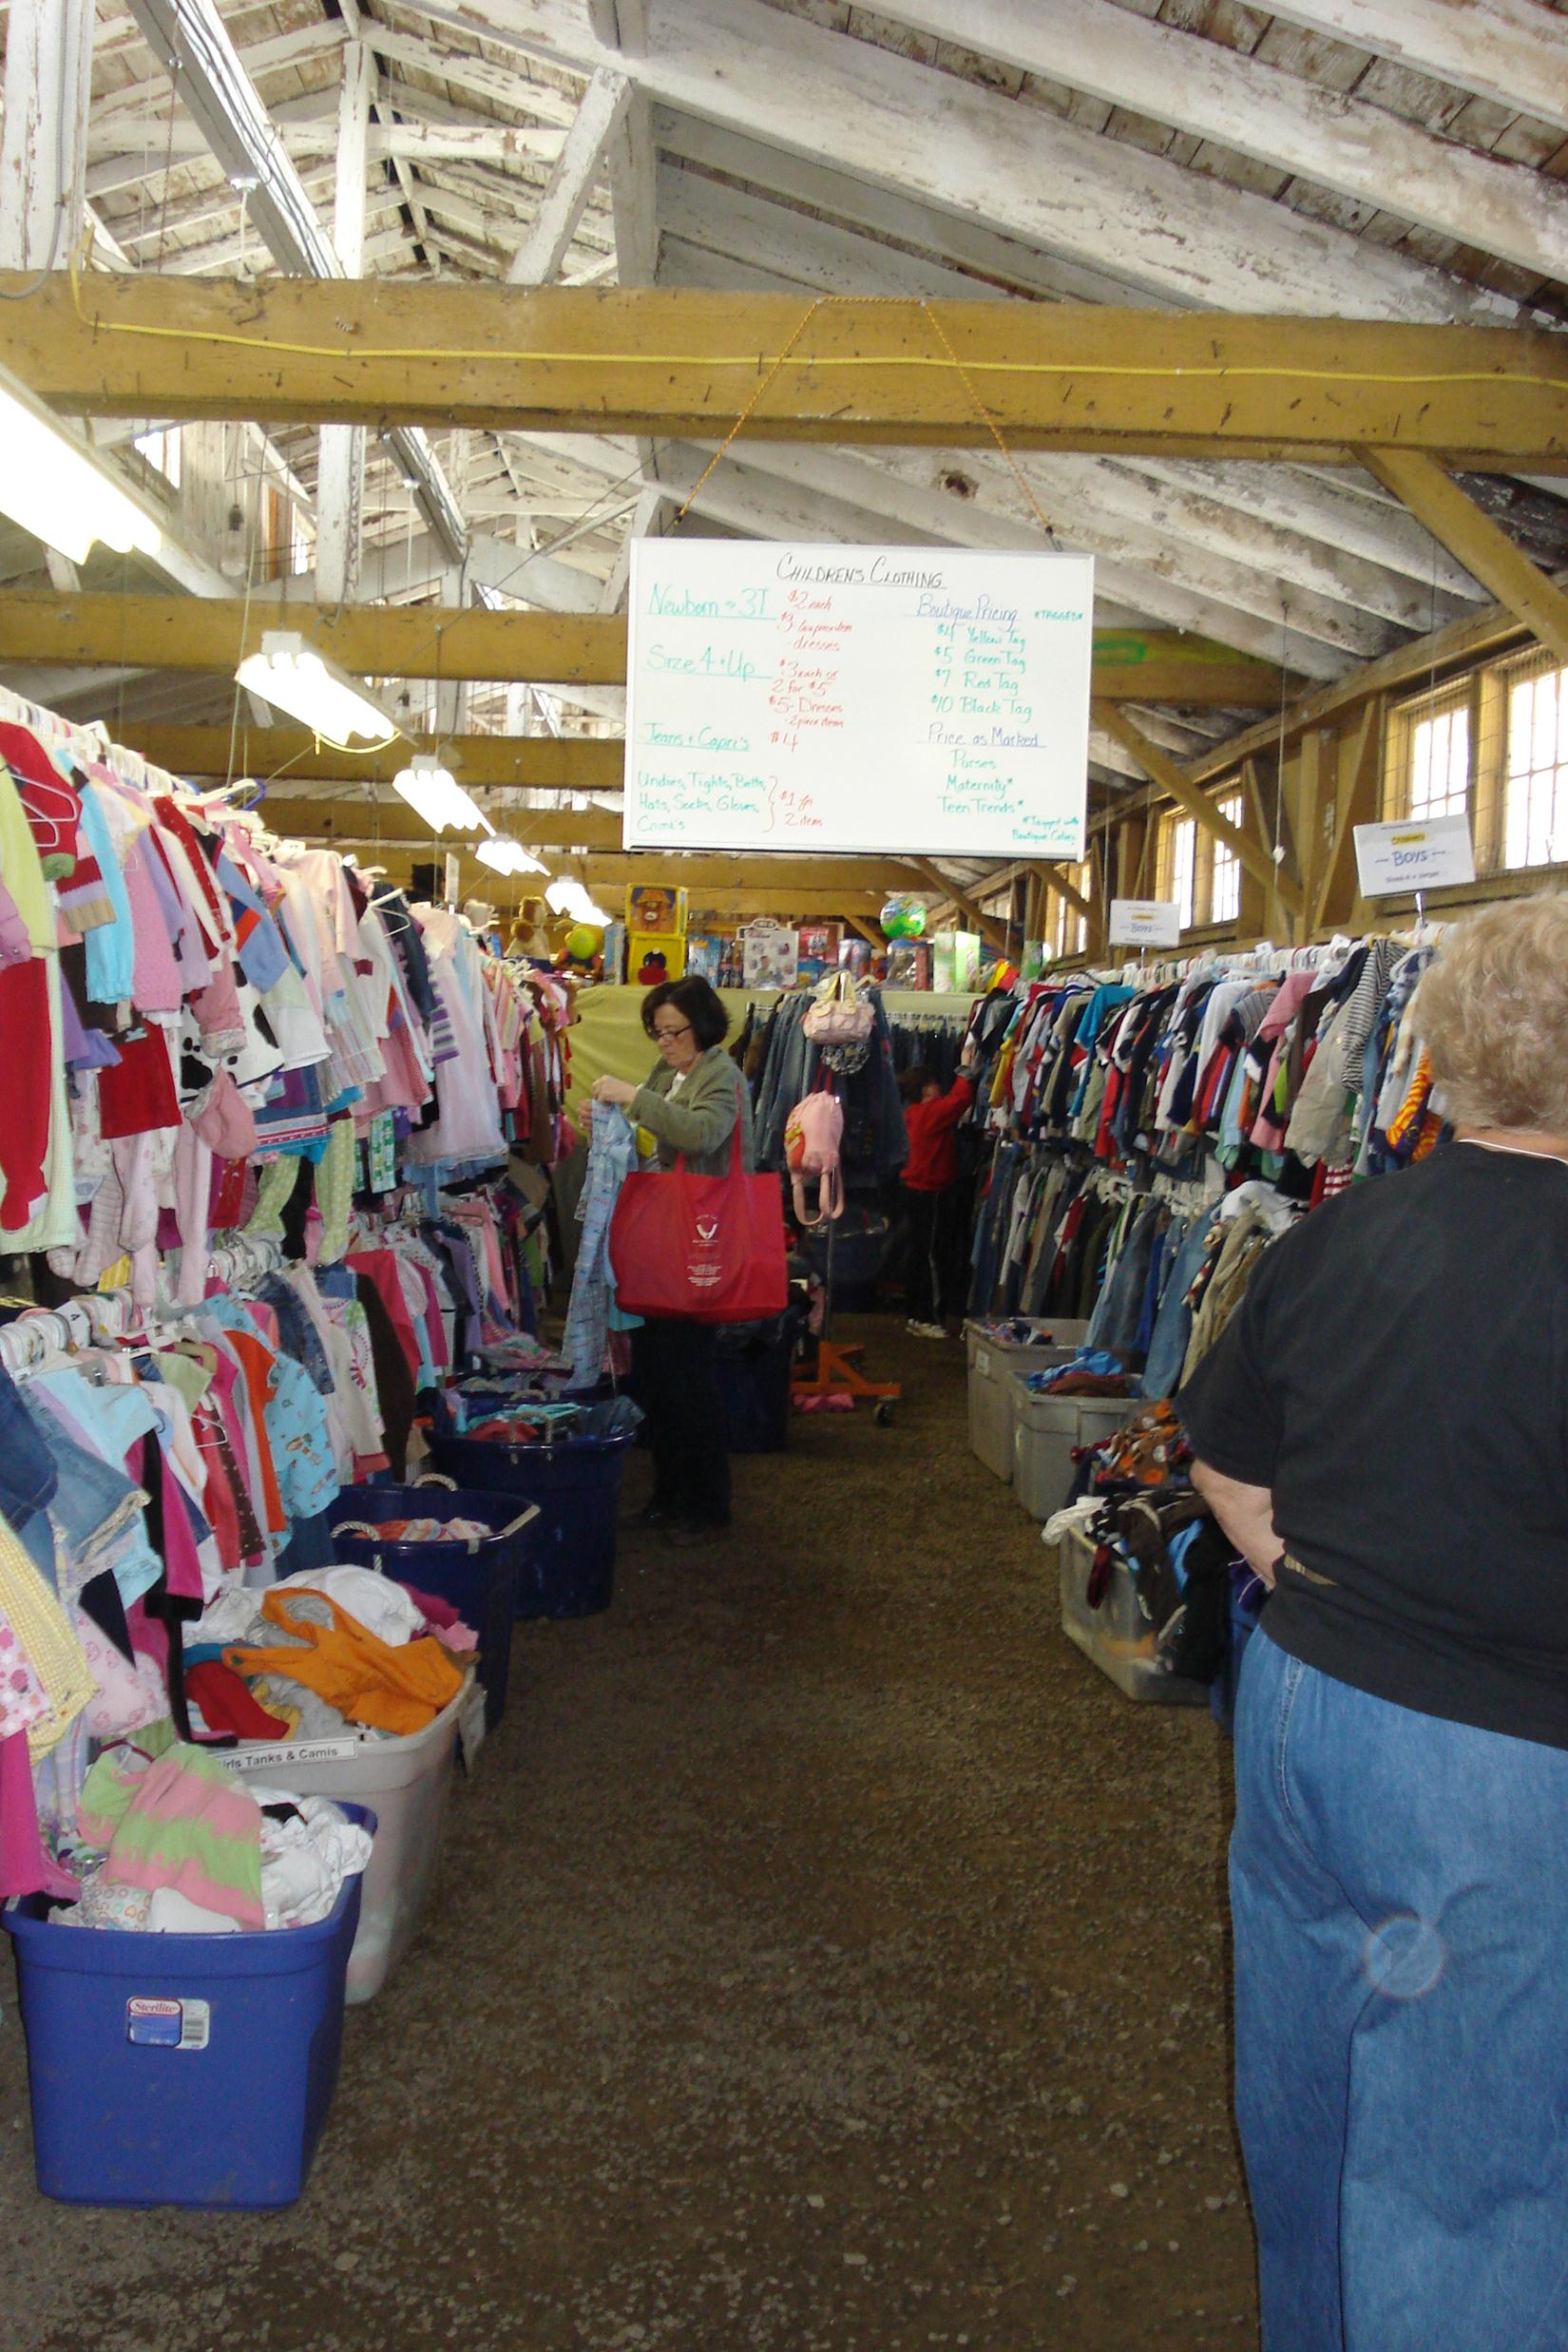 VNA Rummage Sale to Benefit Health and Hospice Care for Needy Families